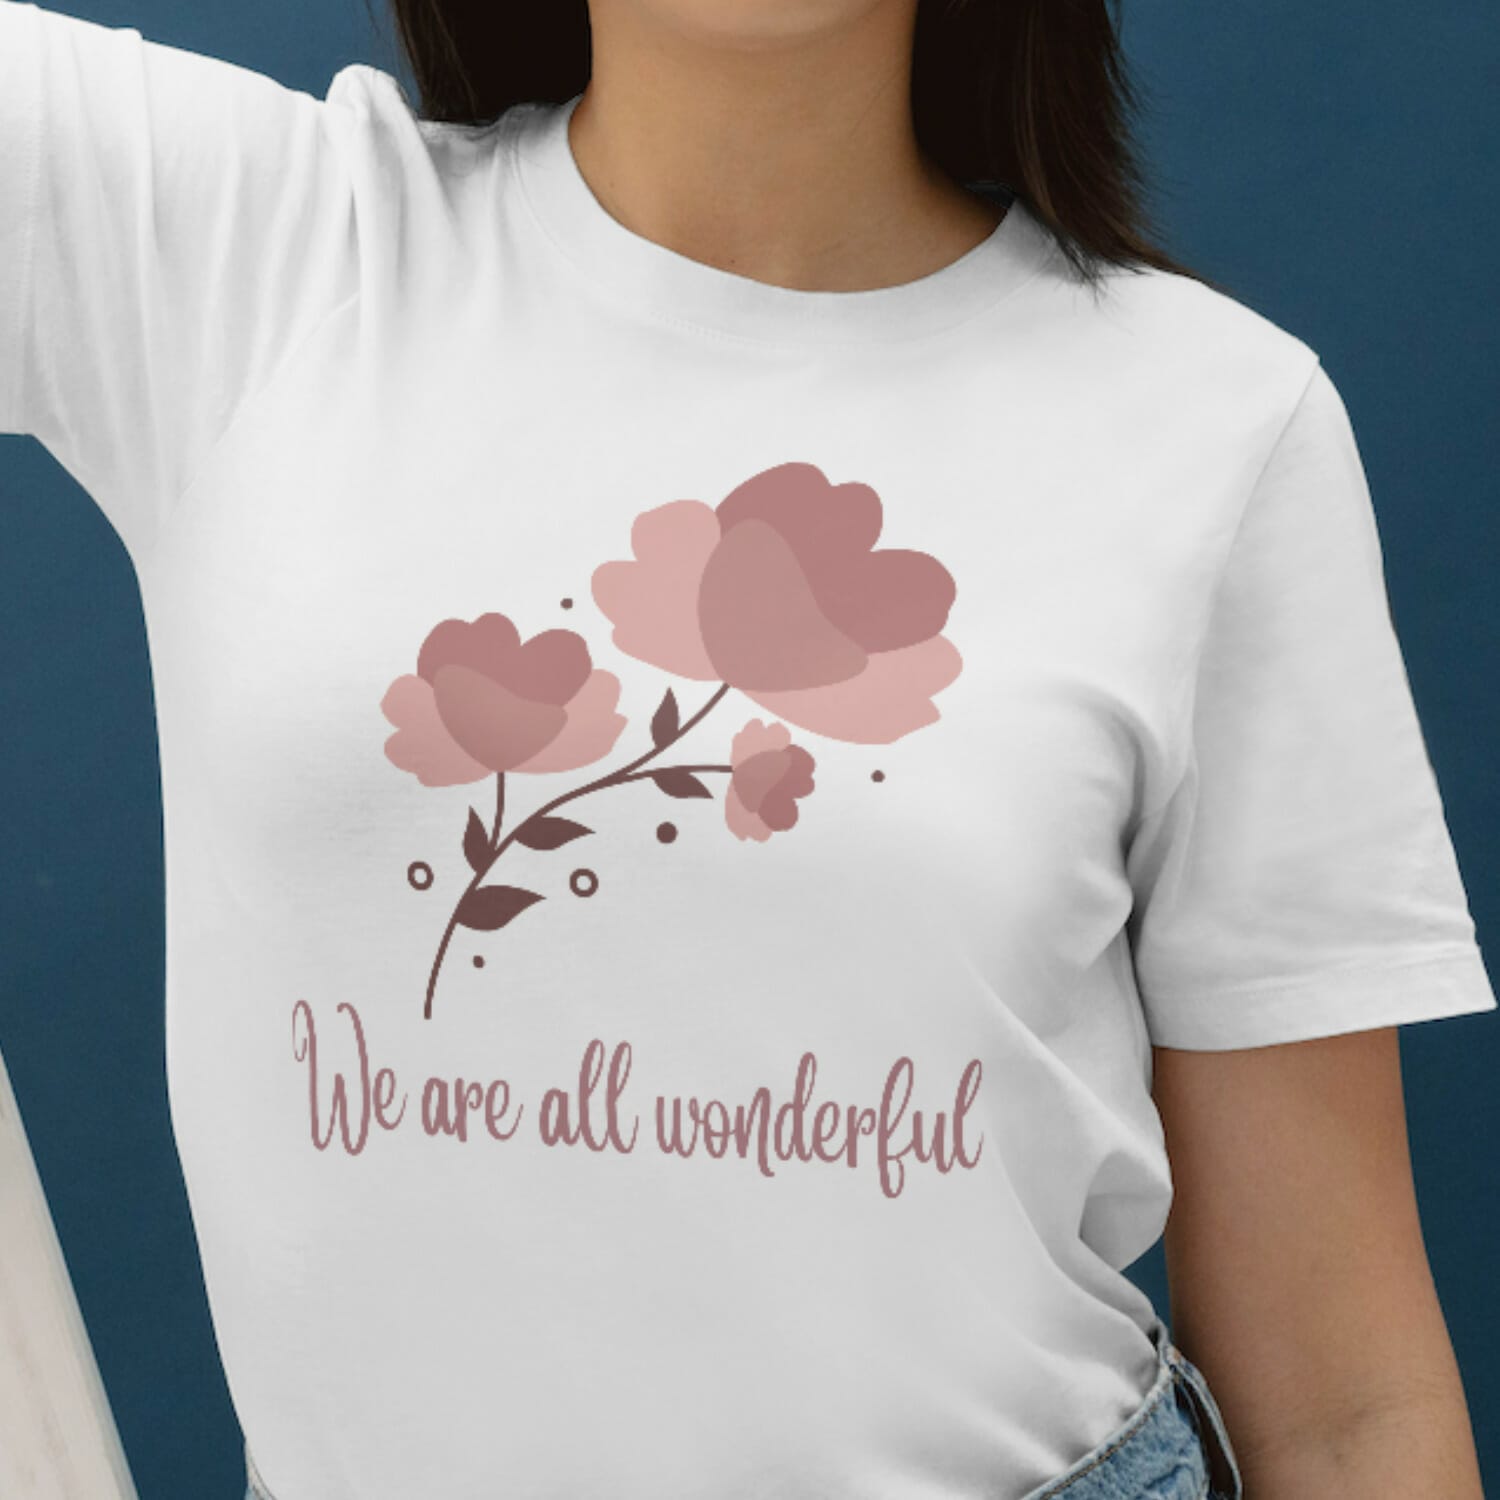 Free Design For T-shirt We Are All Wonderfull